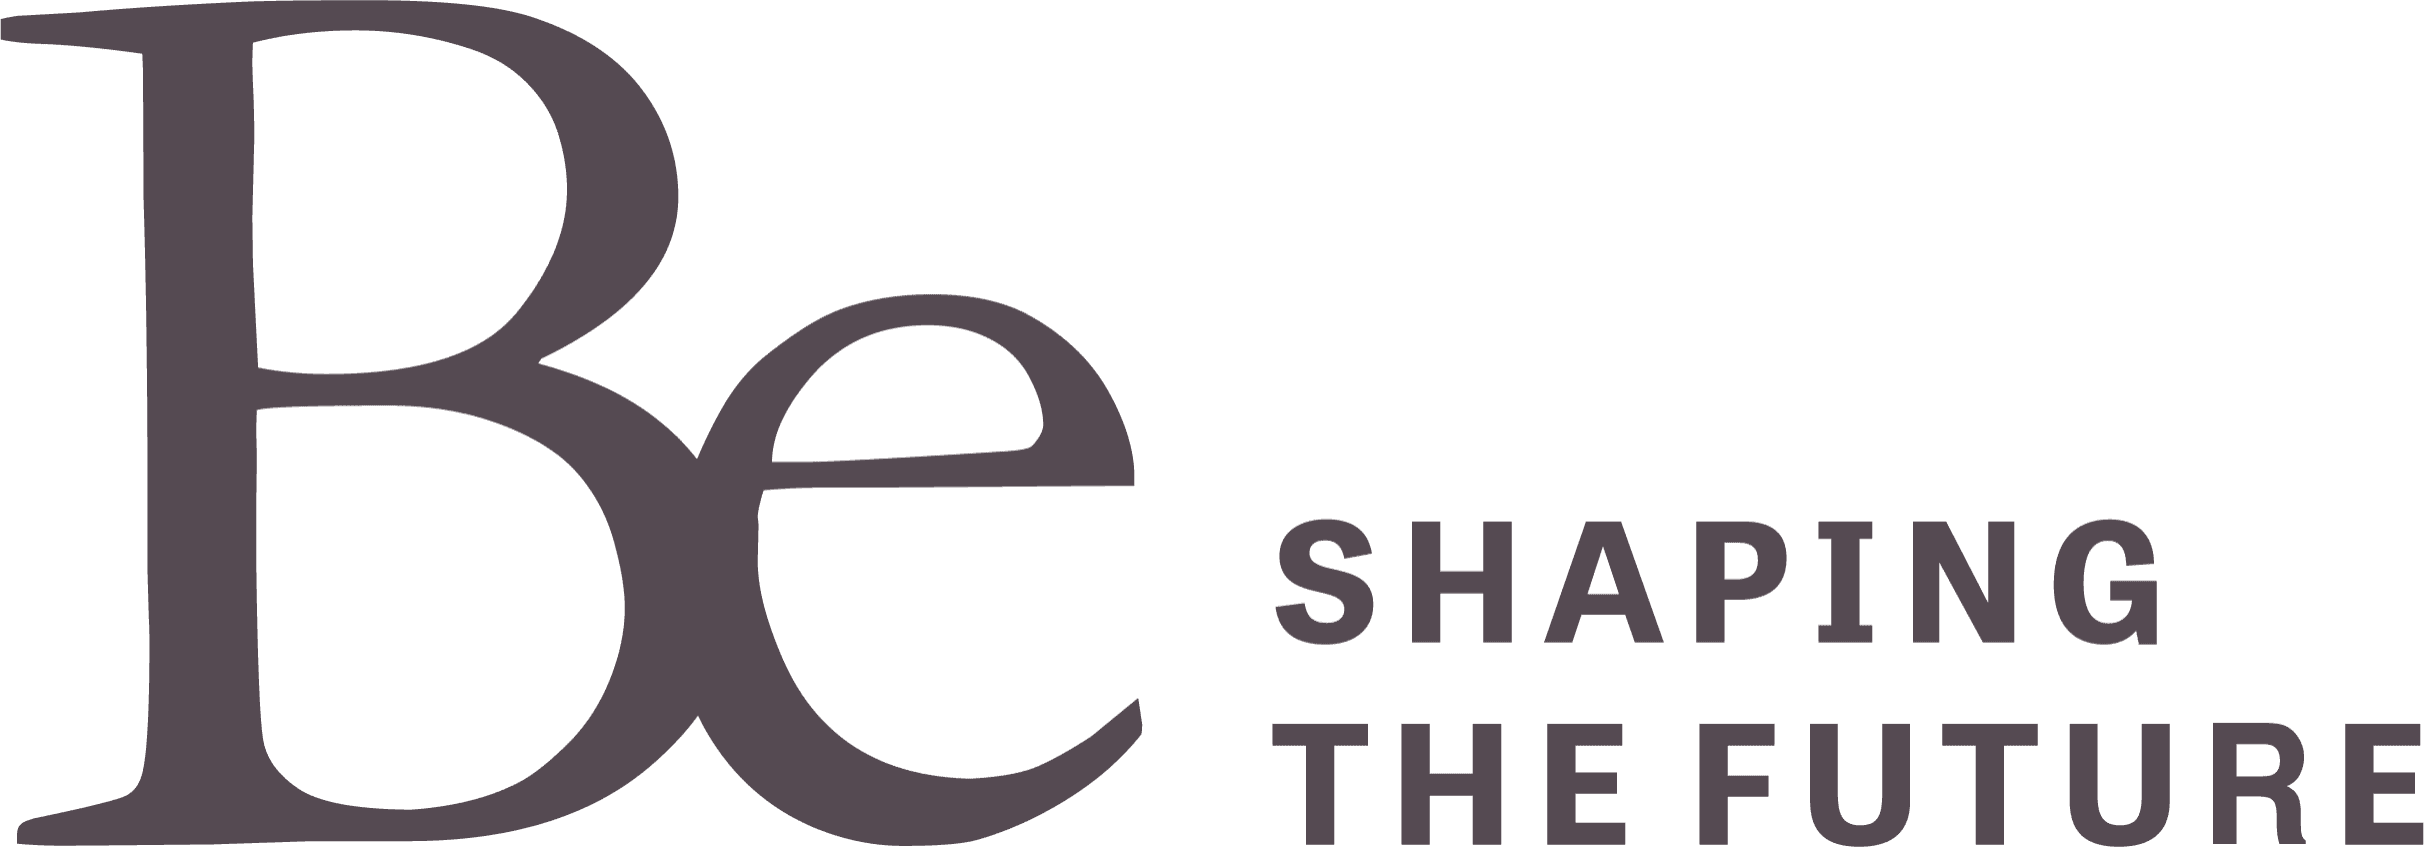 Be Shaping the Future Management Consulting AG